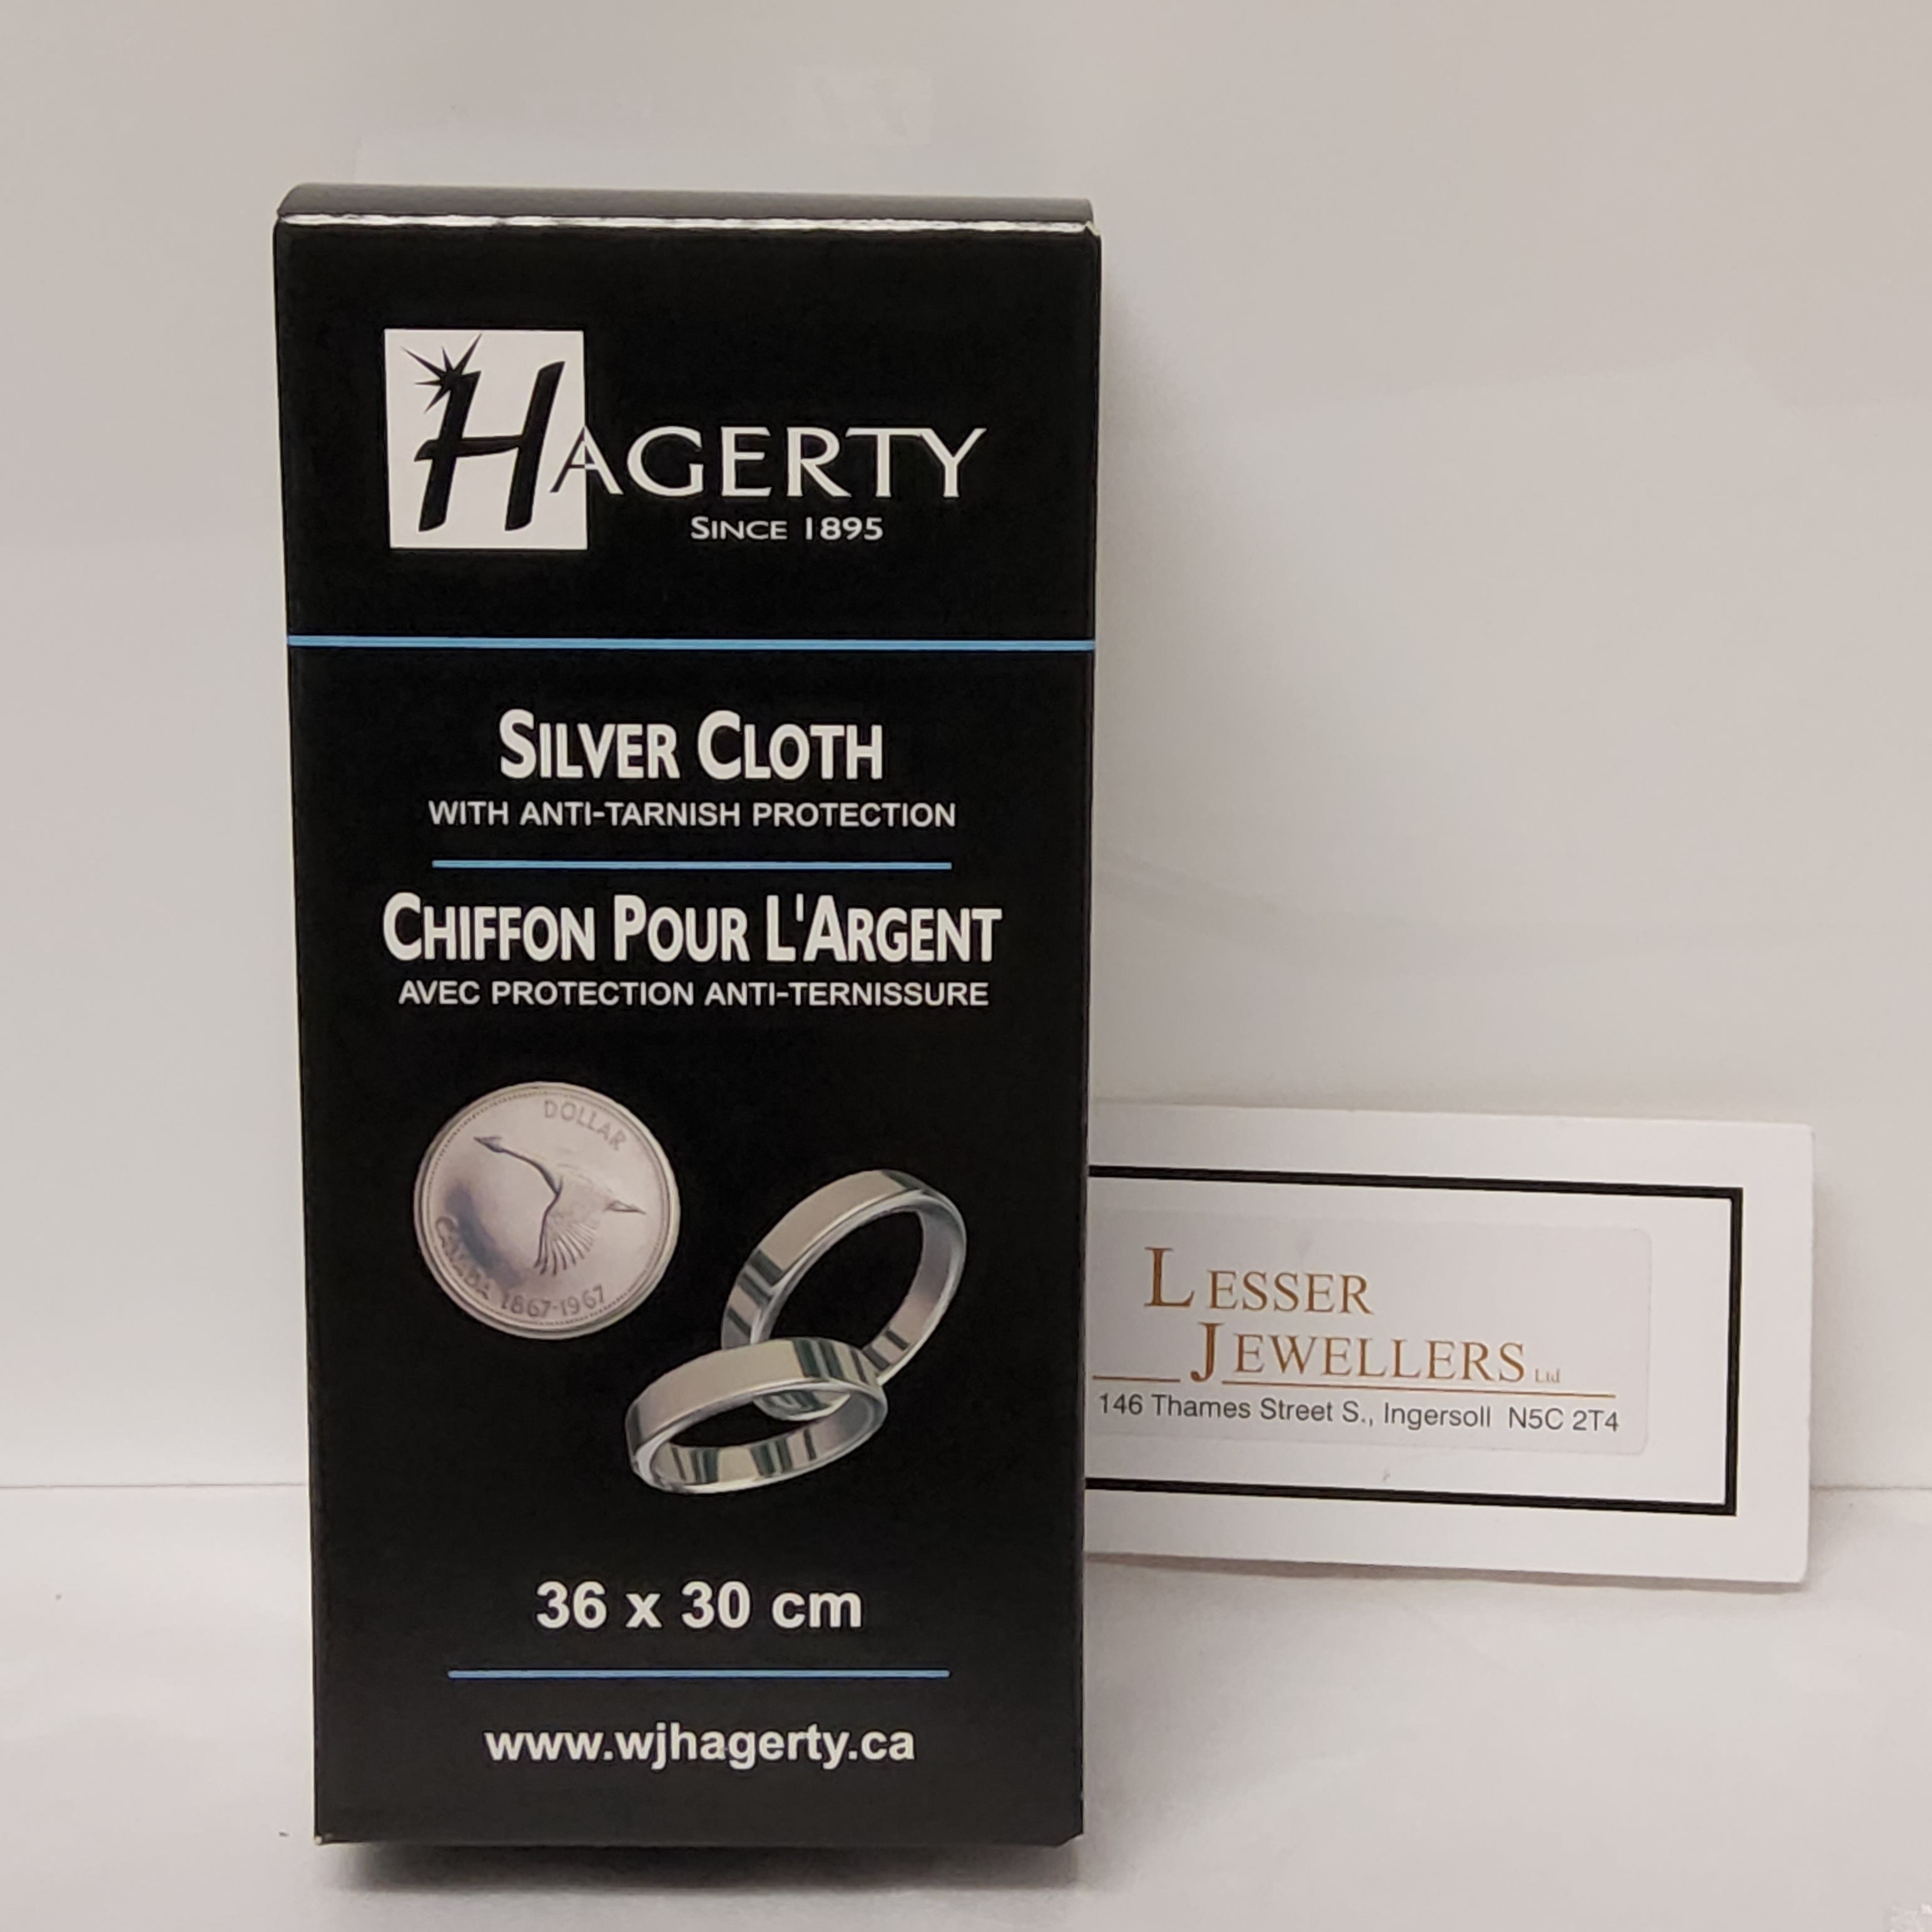 Hagerty Silver Cloth with Anti-Tarnish Protection